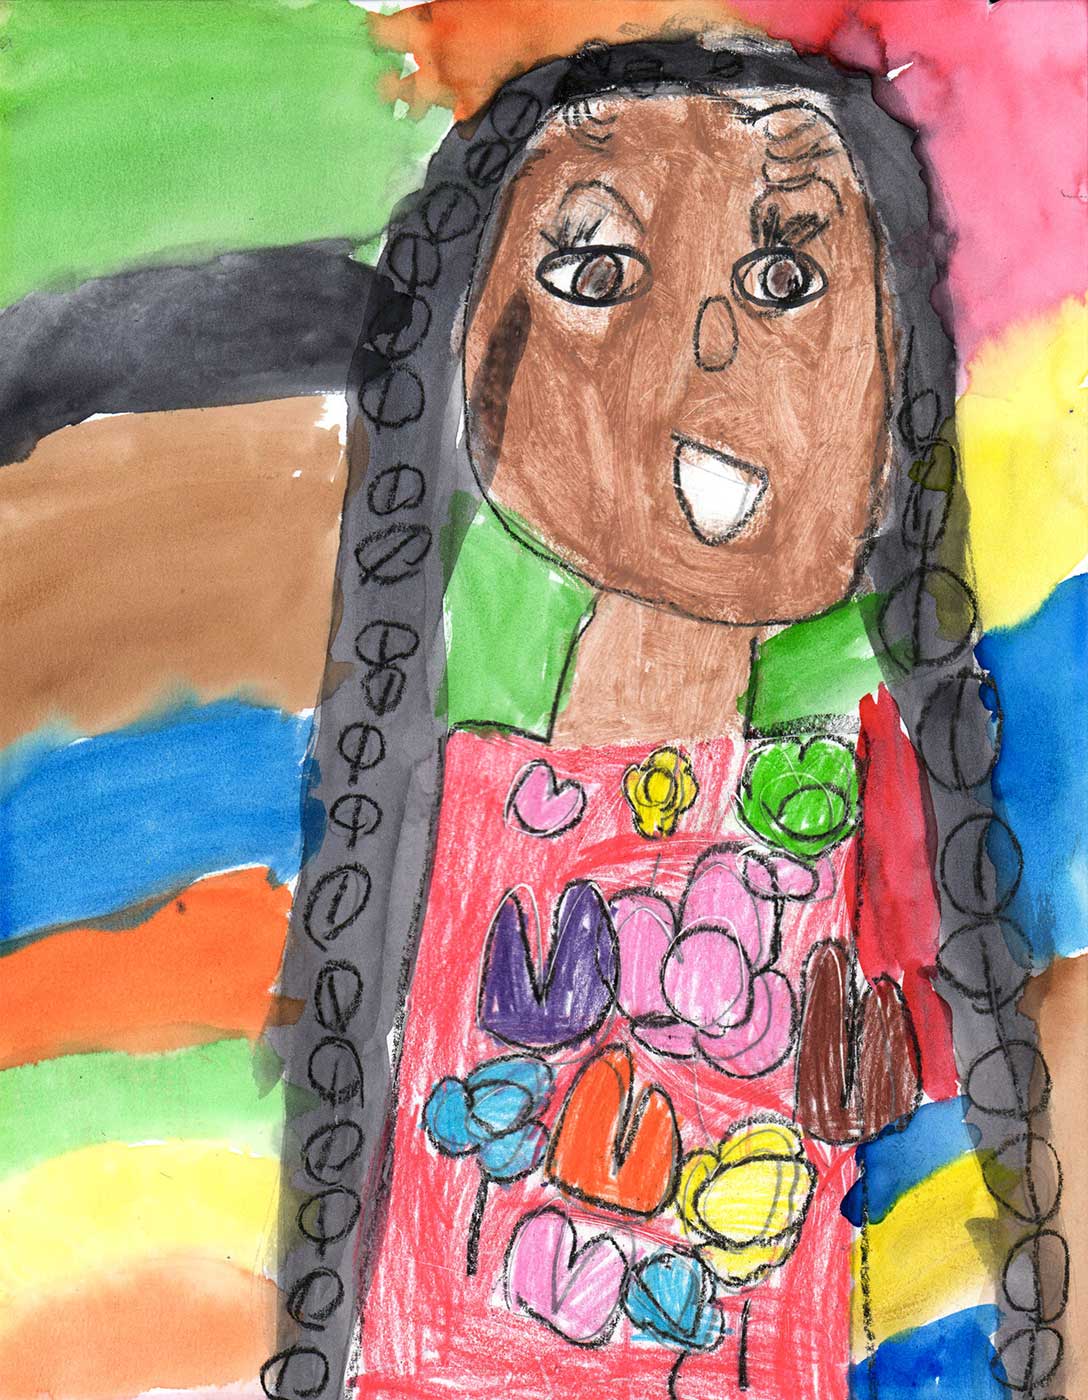 Turning your child's artwork portraits into masterpieces